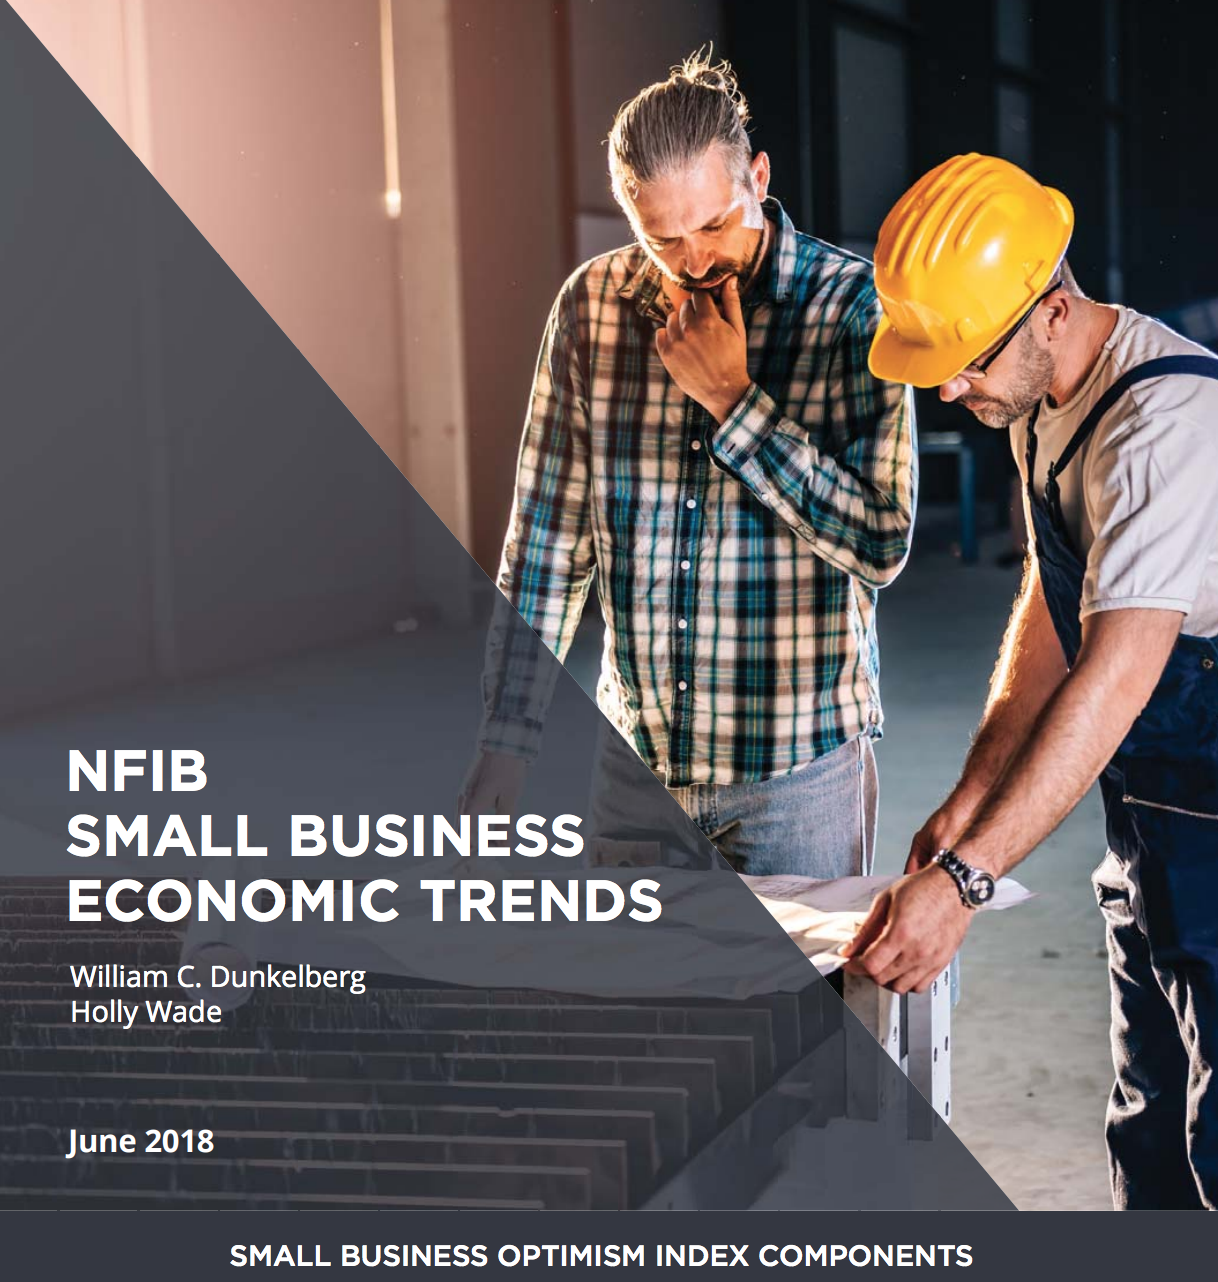 NFIB Small Business Economic Trends